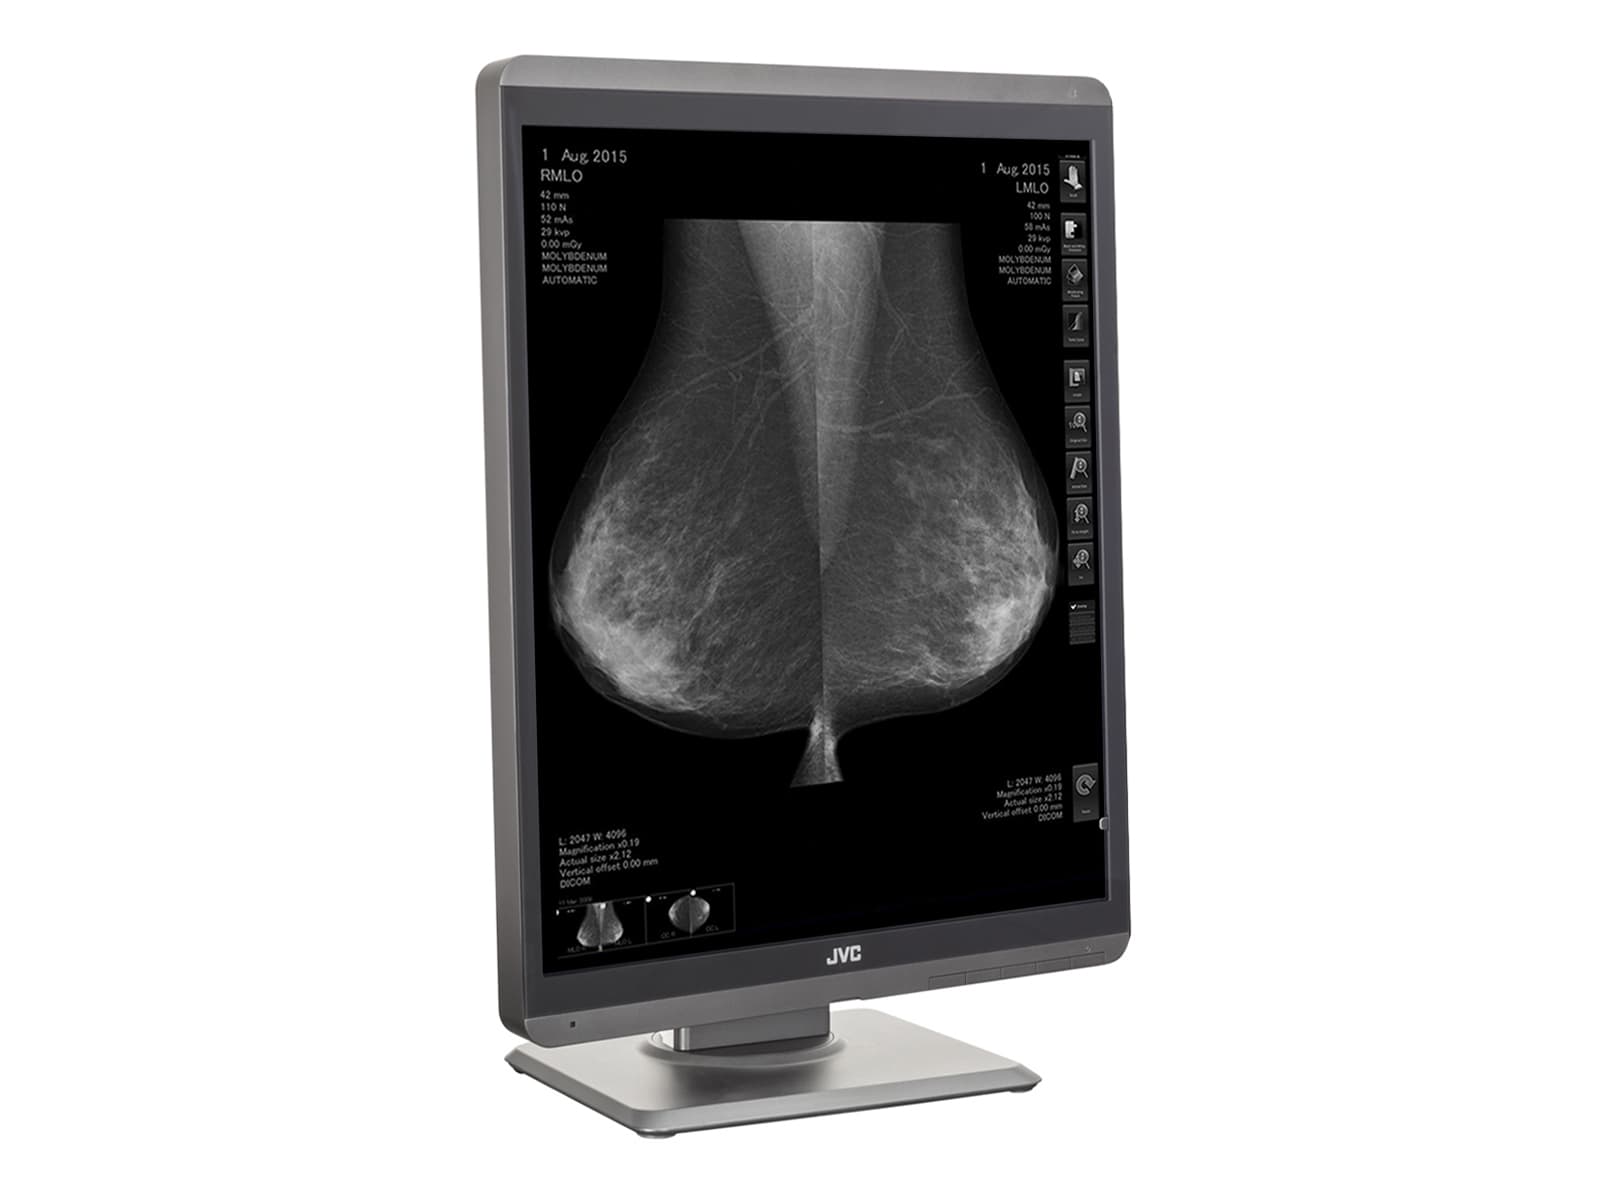 JVC Totoku MS-S500 5MP 21" Mammo 3D-DBT Grayscale LED Breast Imaging Display (MS-S500) Monitors.com 